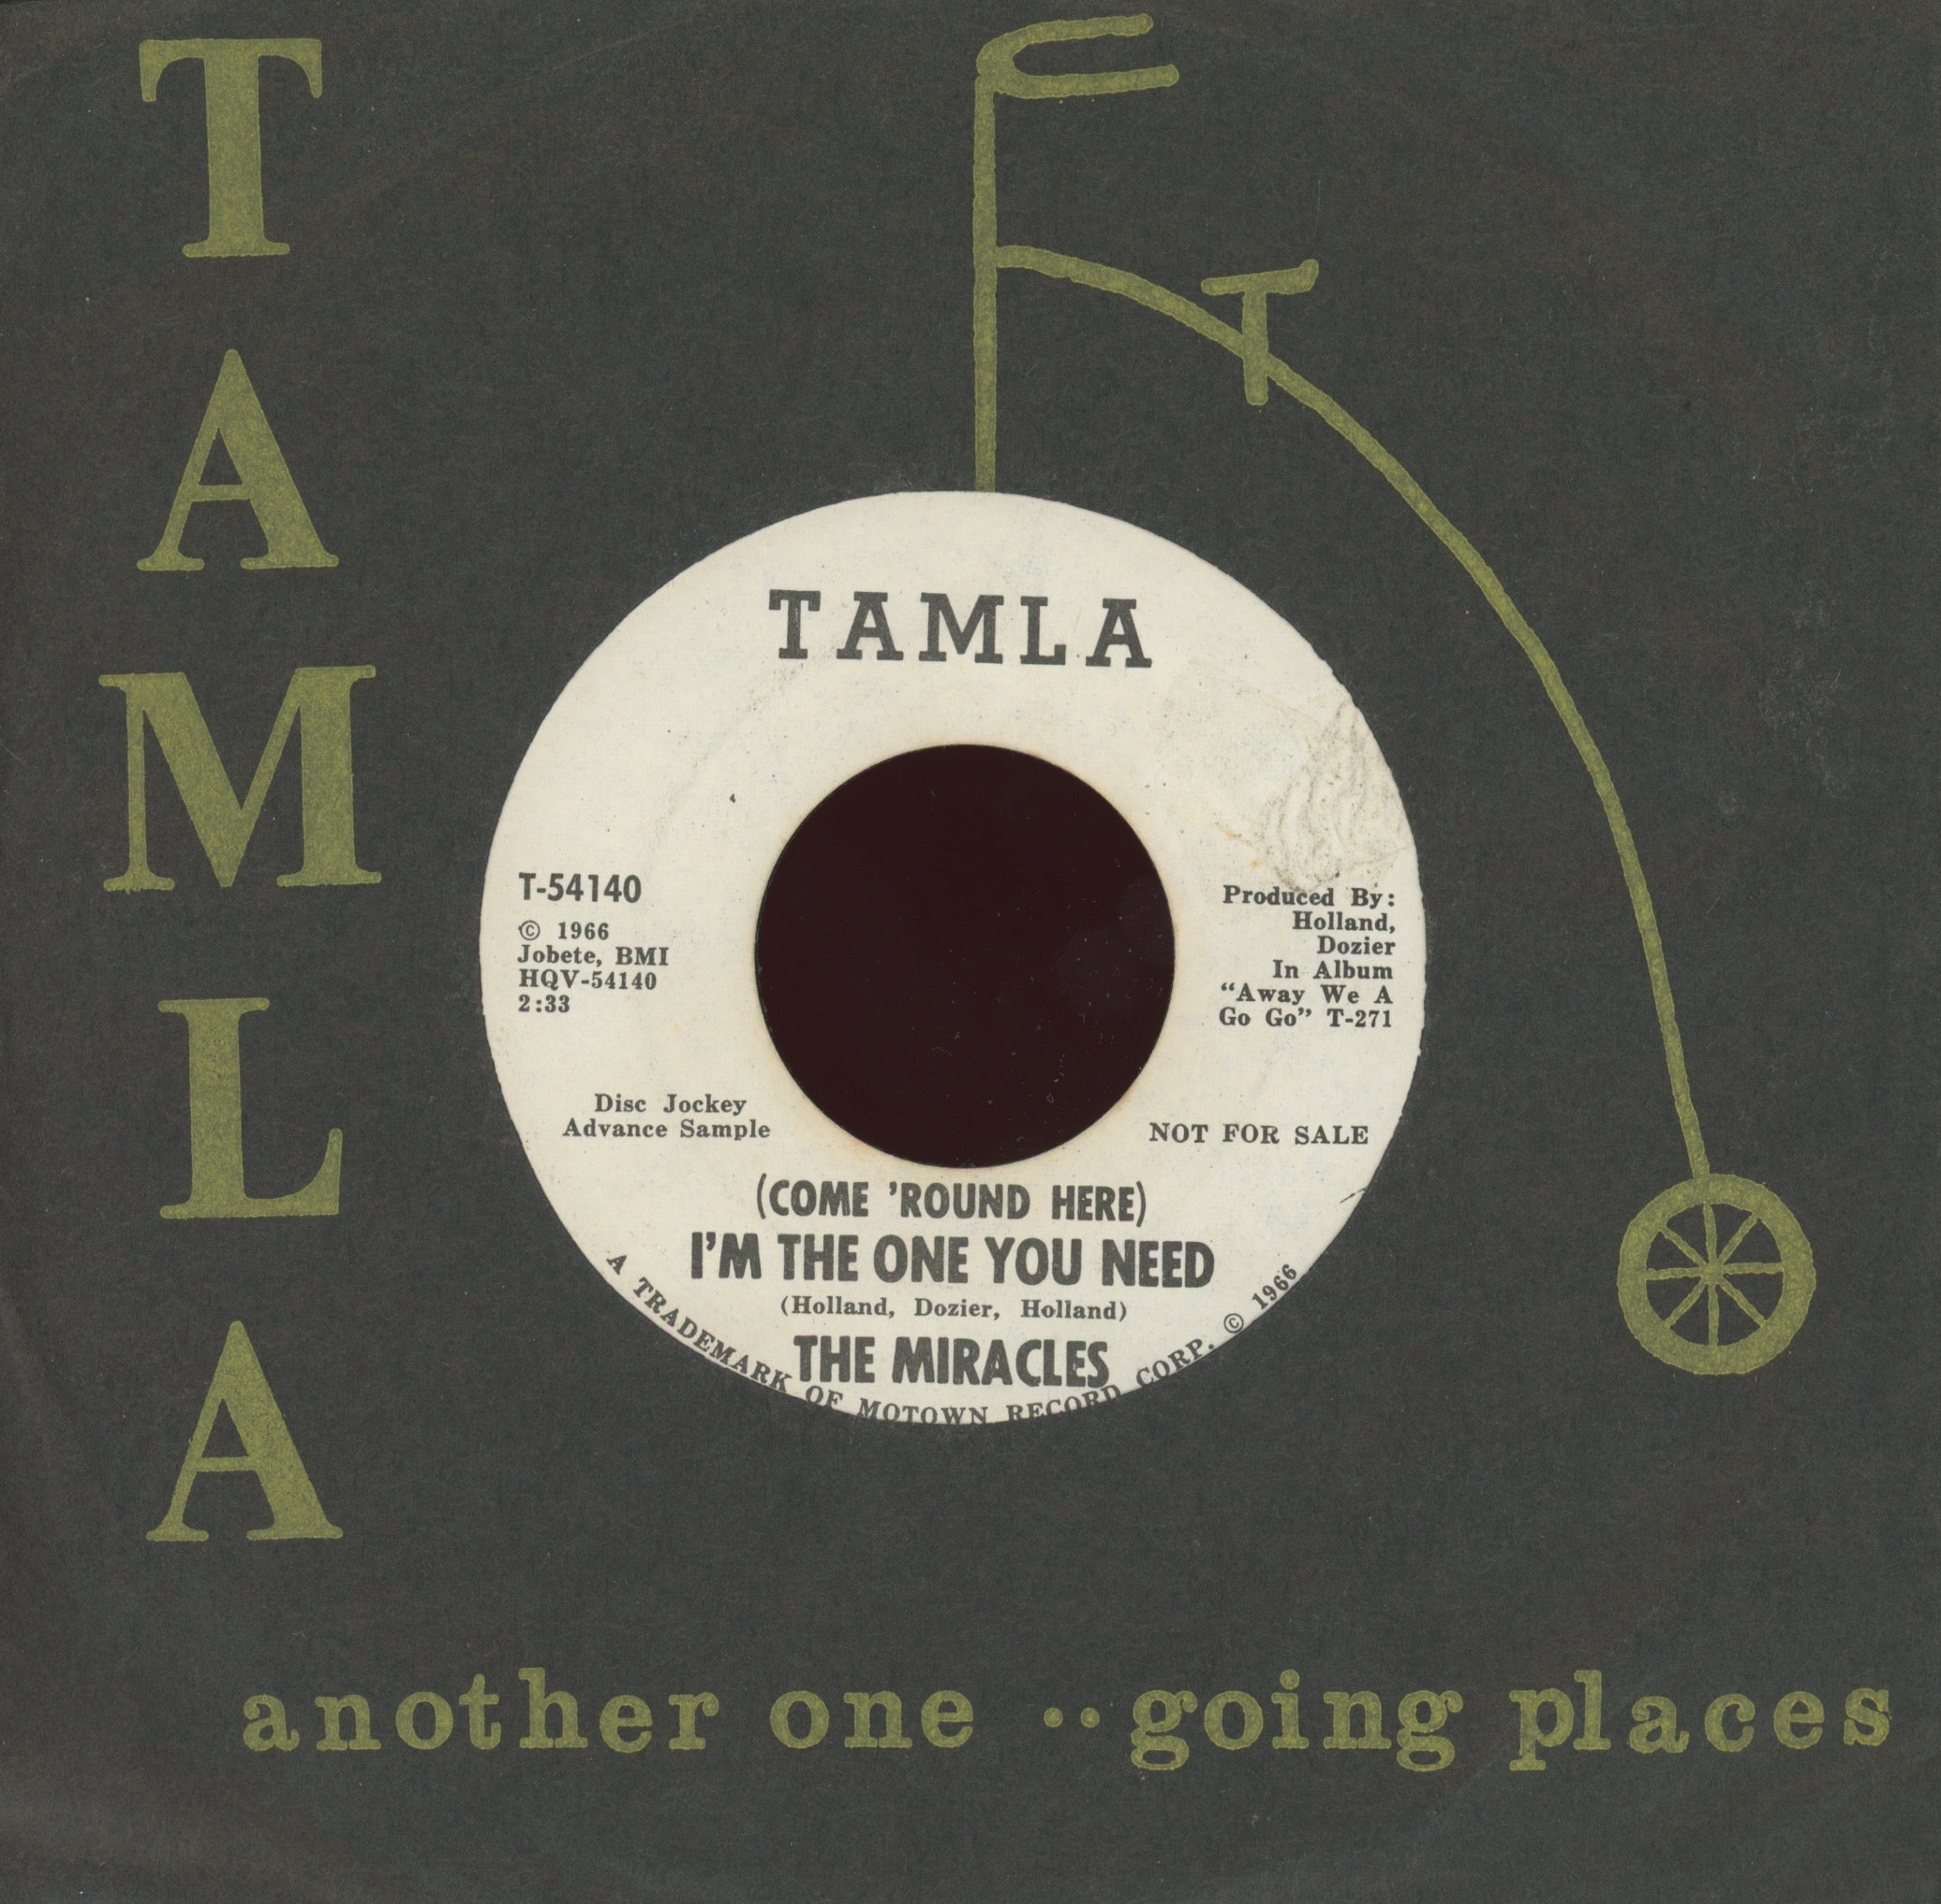 The Miracles - (Come 'Round Here) I'm The One You Need on Tamla Promo Northern Soul 45